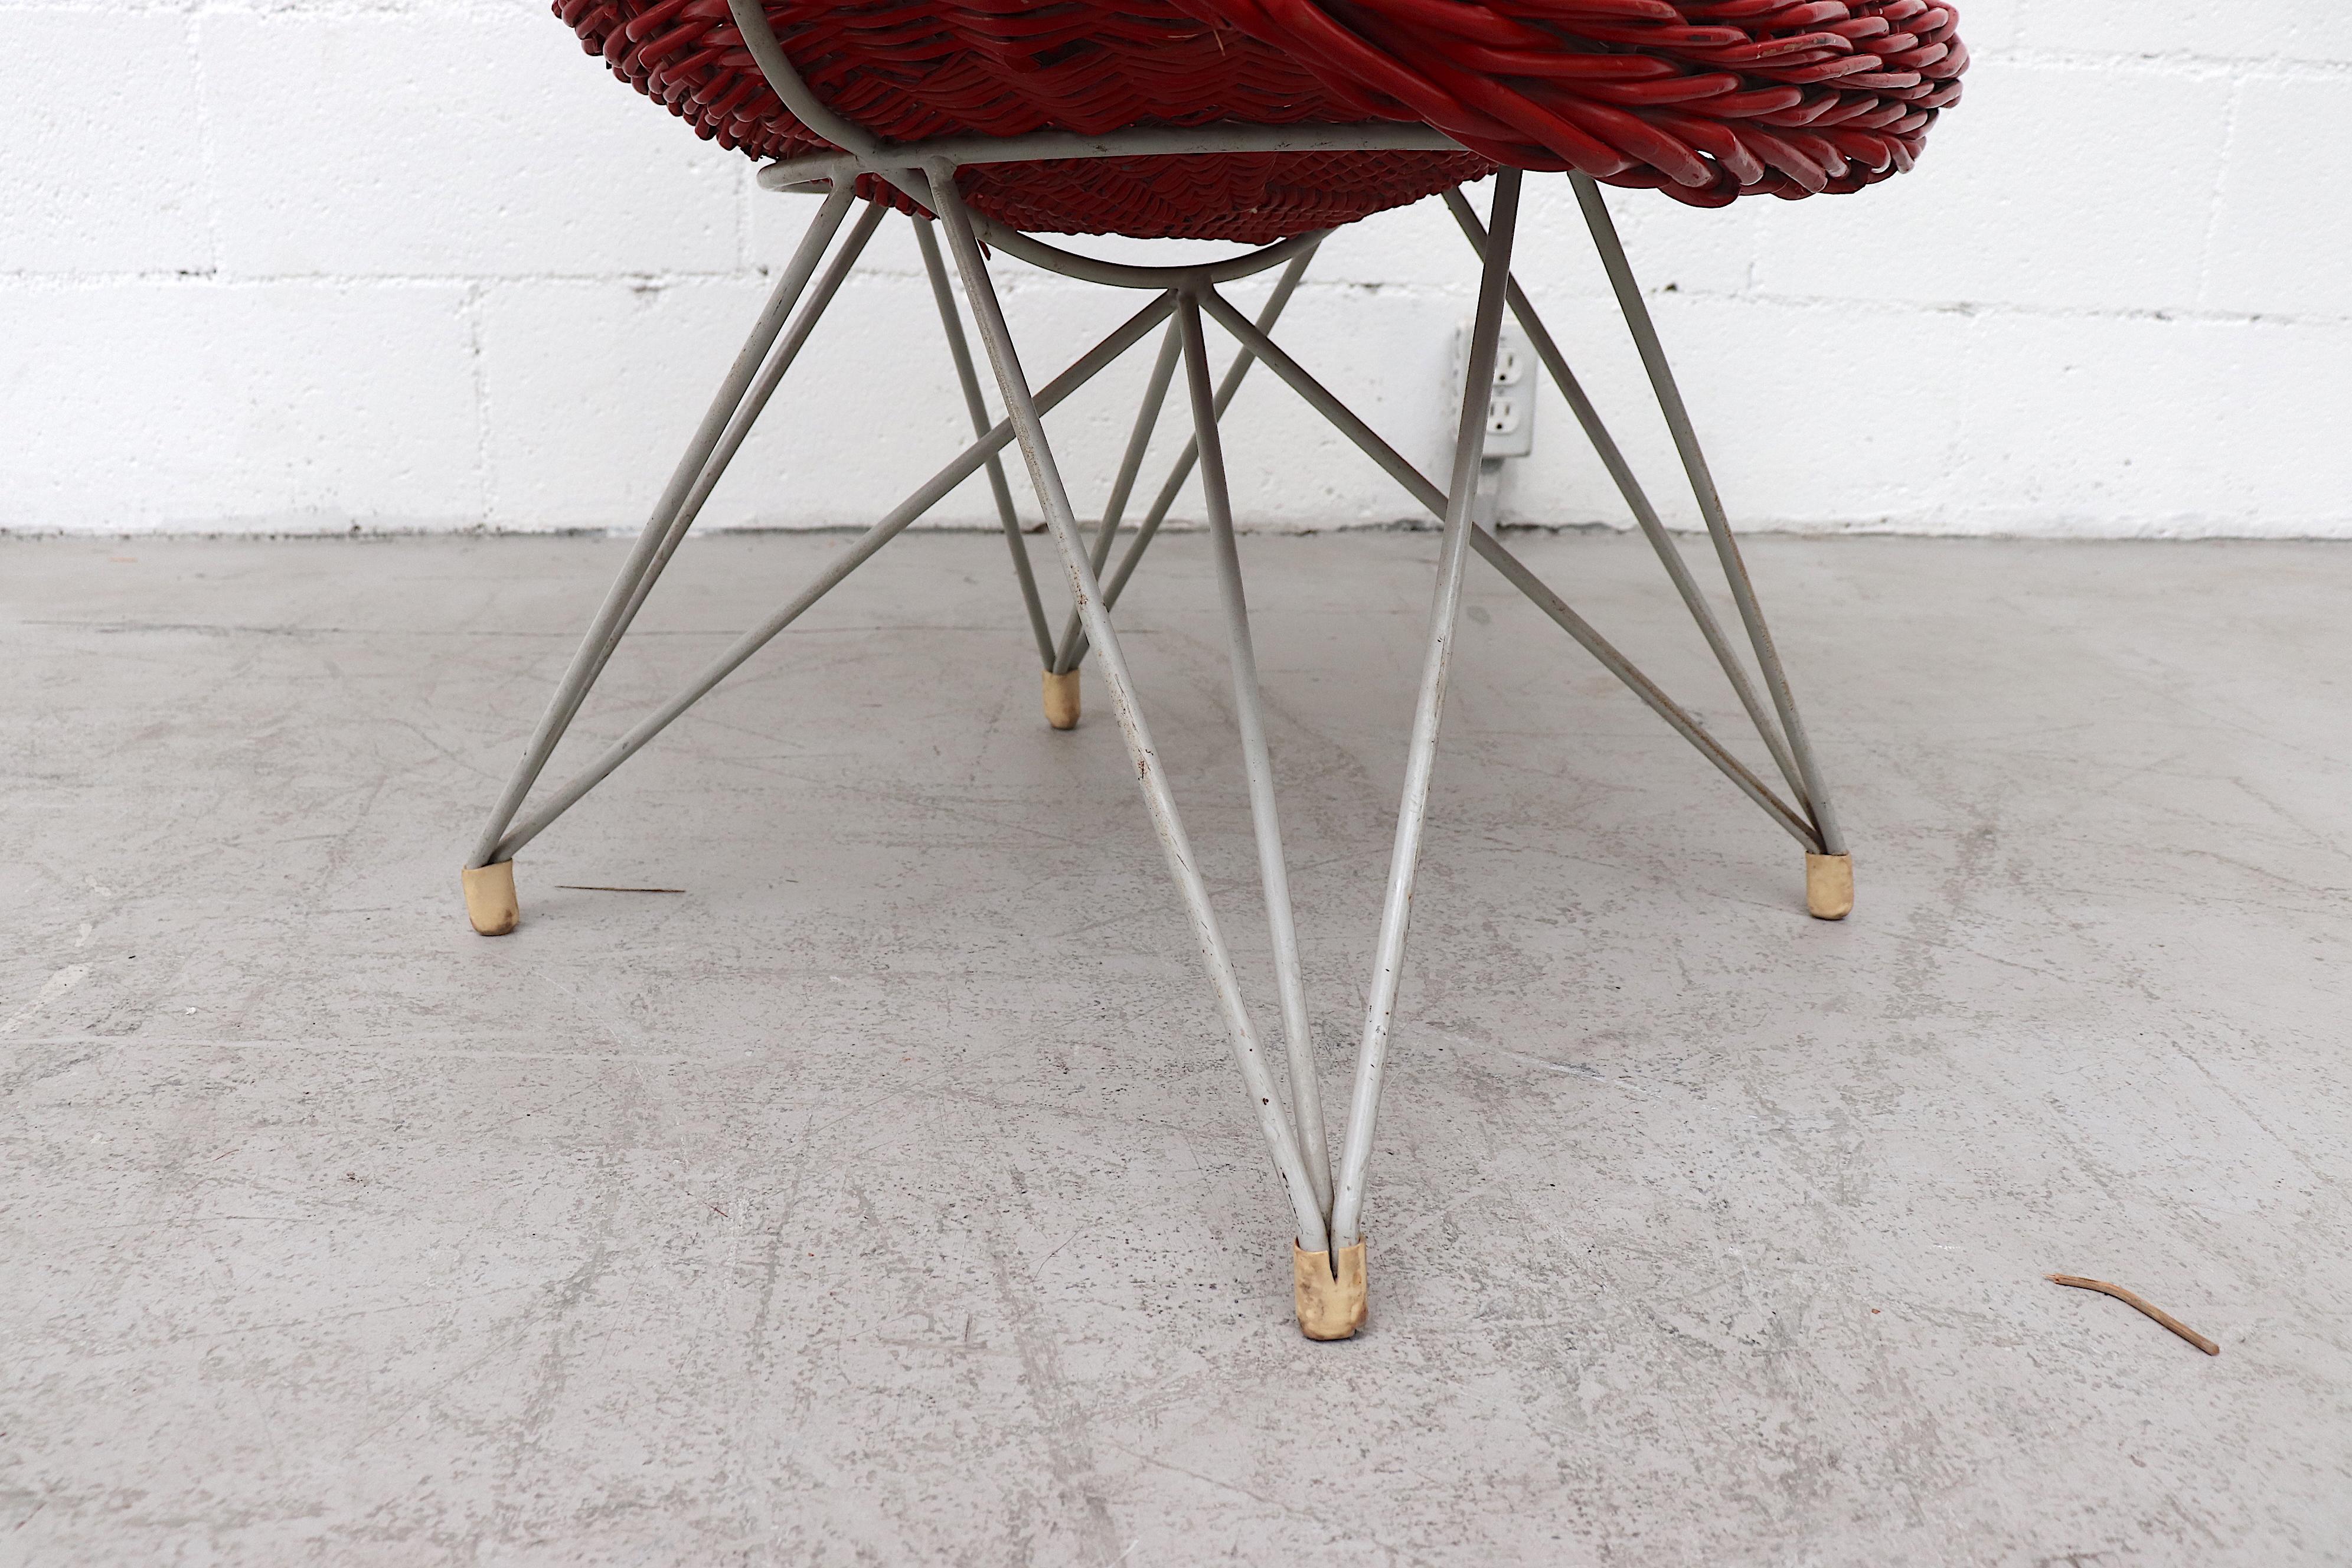 Steel Red Jacques Adnet Style Red Bamboo Hoop Chair by Teun Velthuizen for Urotan